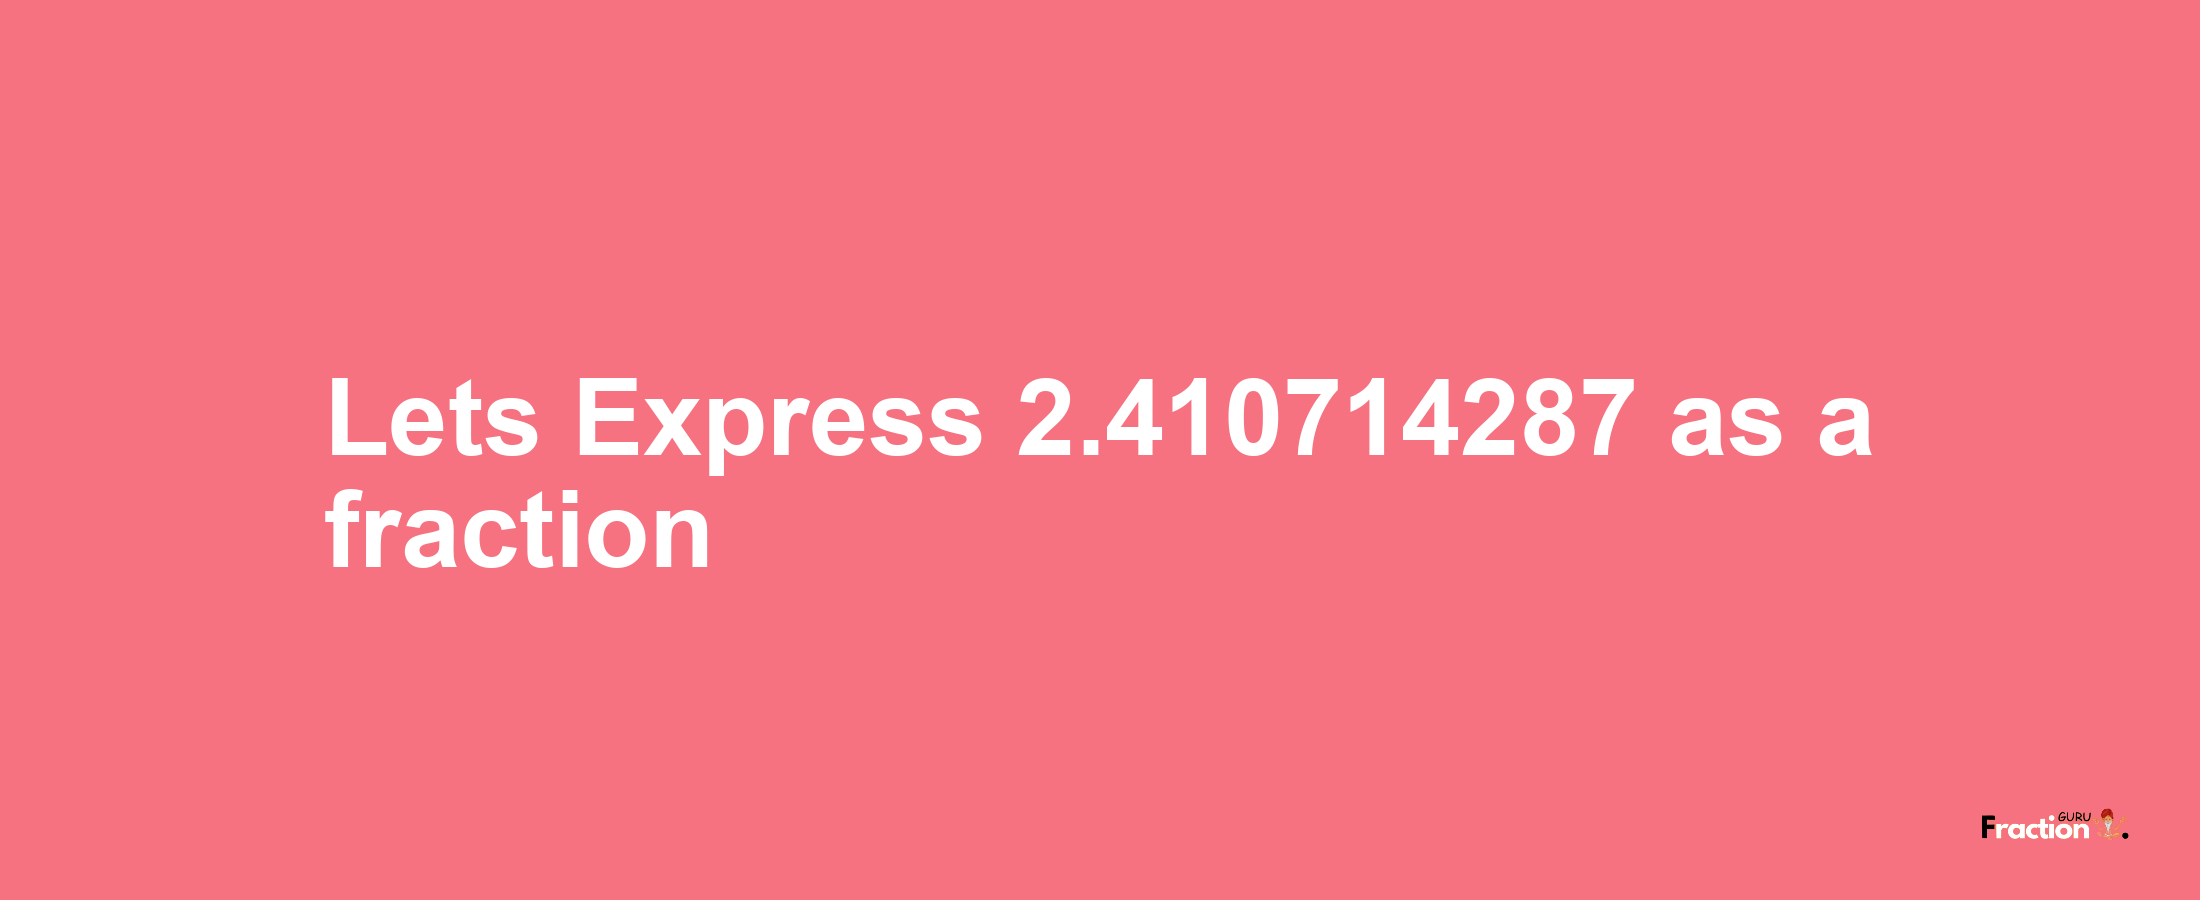 Lets Express 2.410714287 as afraction